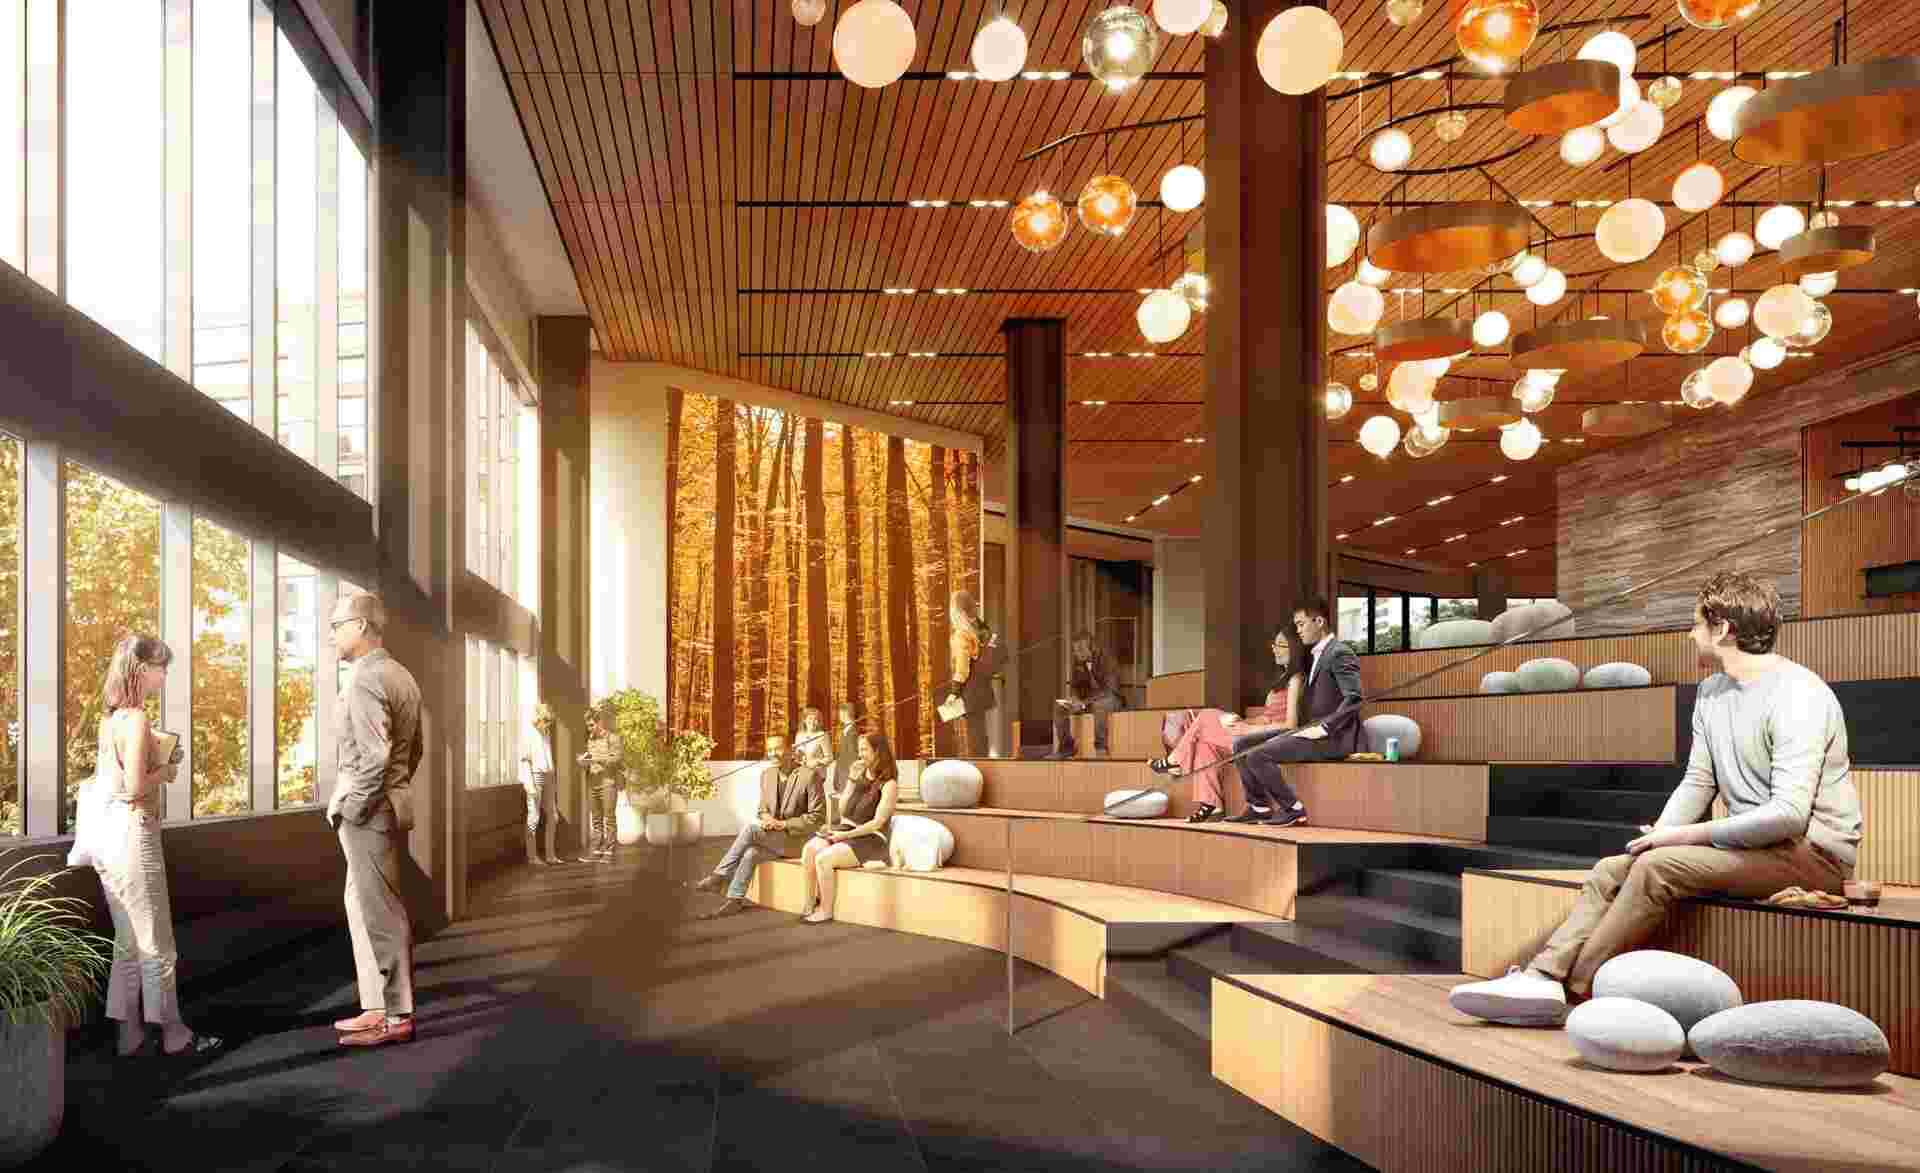 2023-09-27 15:11 EST - 2_A-rendering-of-the-completed-lobby-showing-the-light-and-seating-features-1